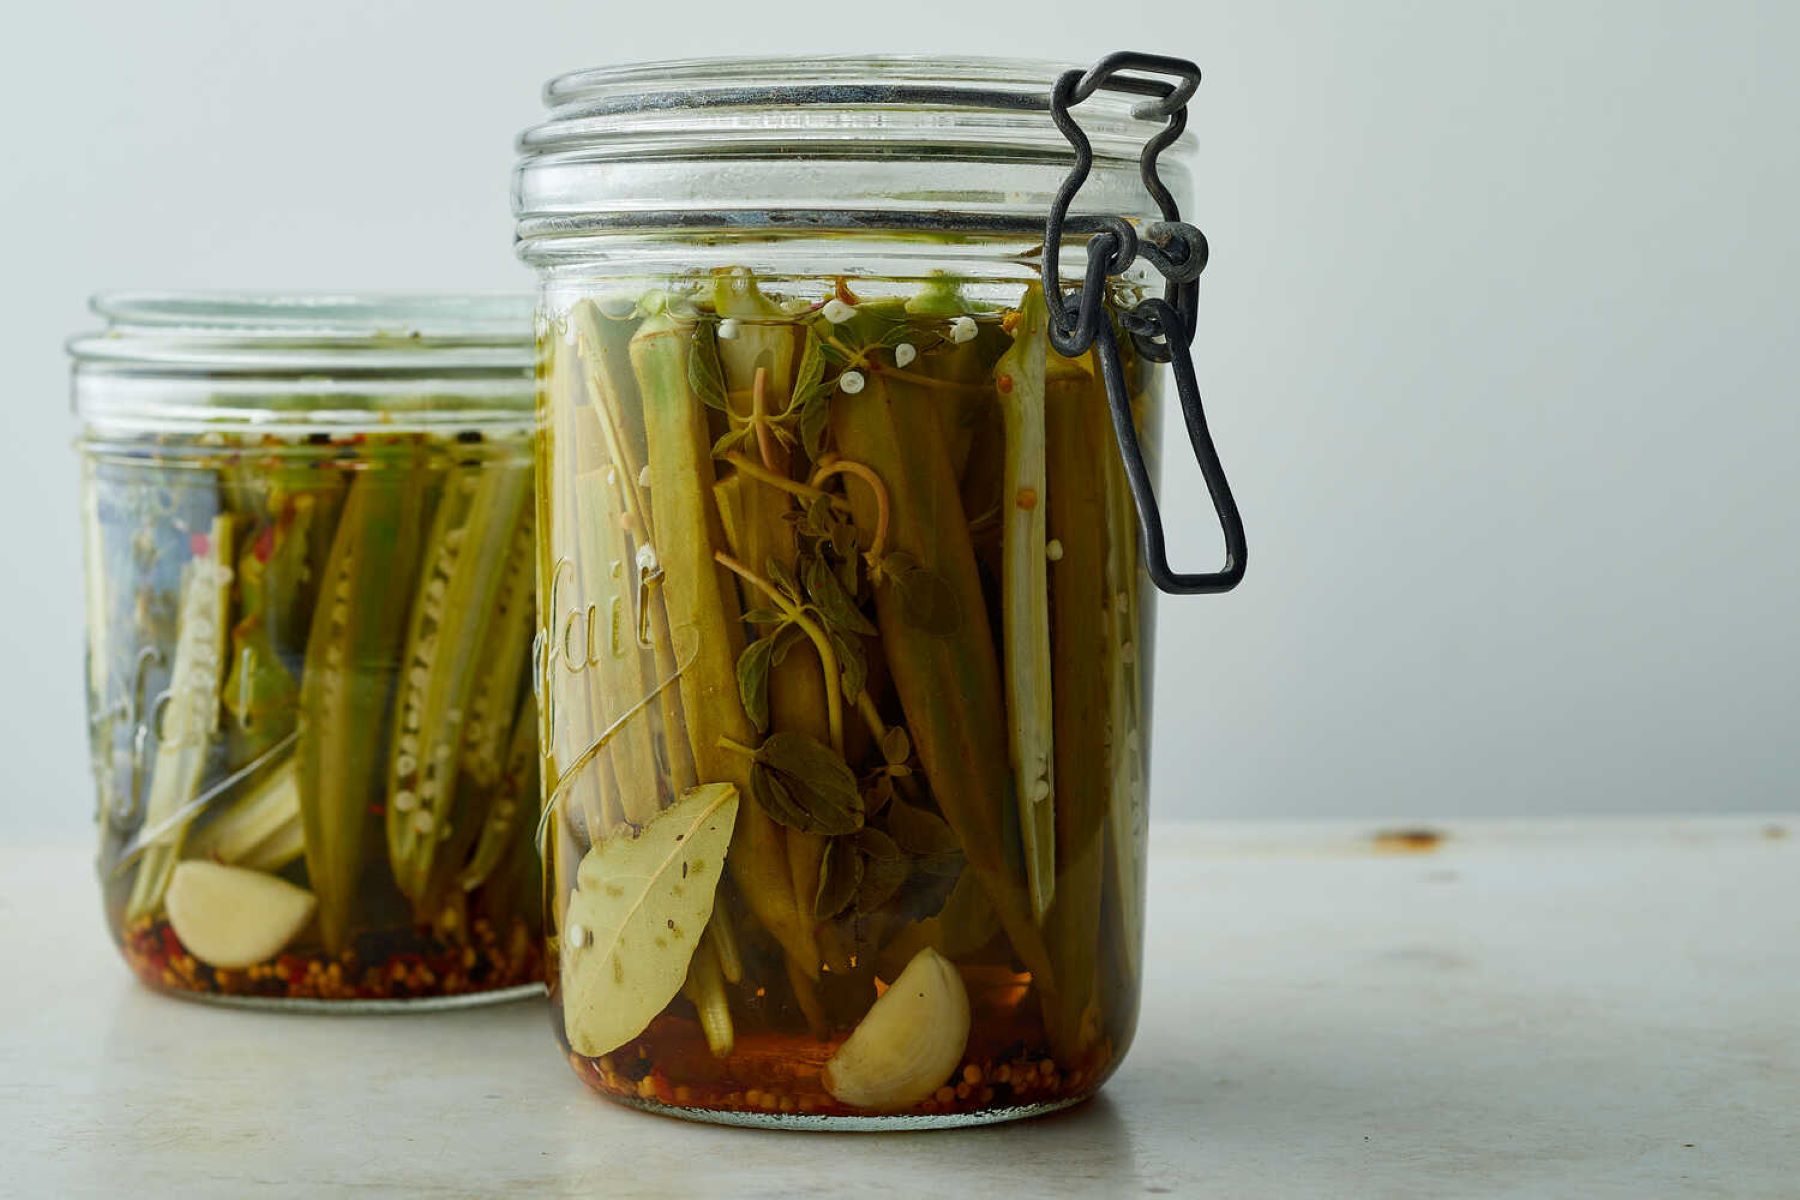 19-pickled-okra-nutrition-facts